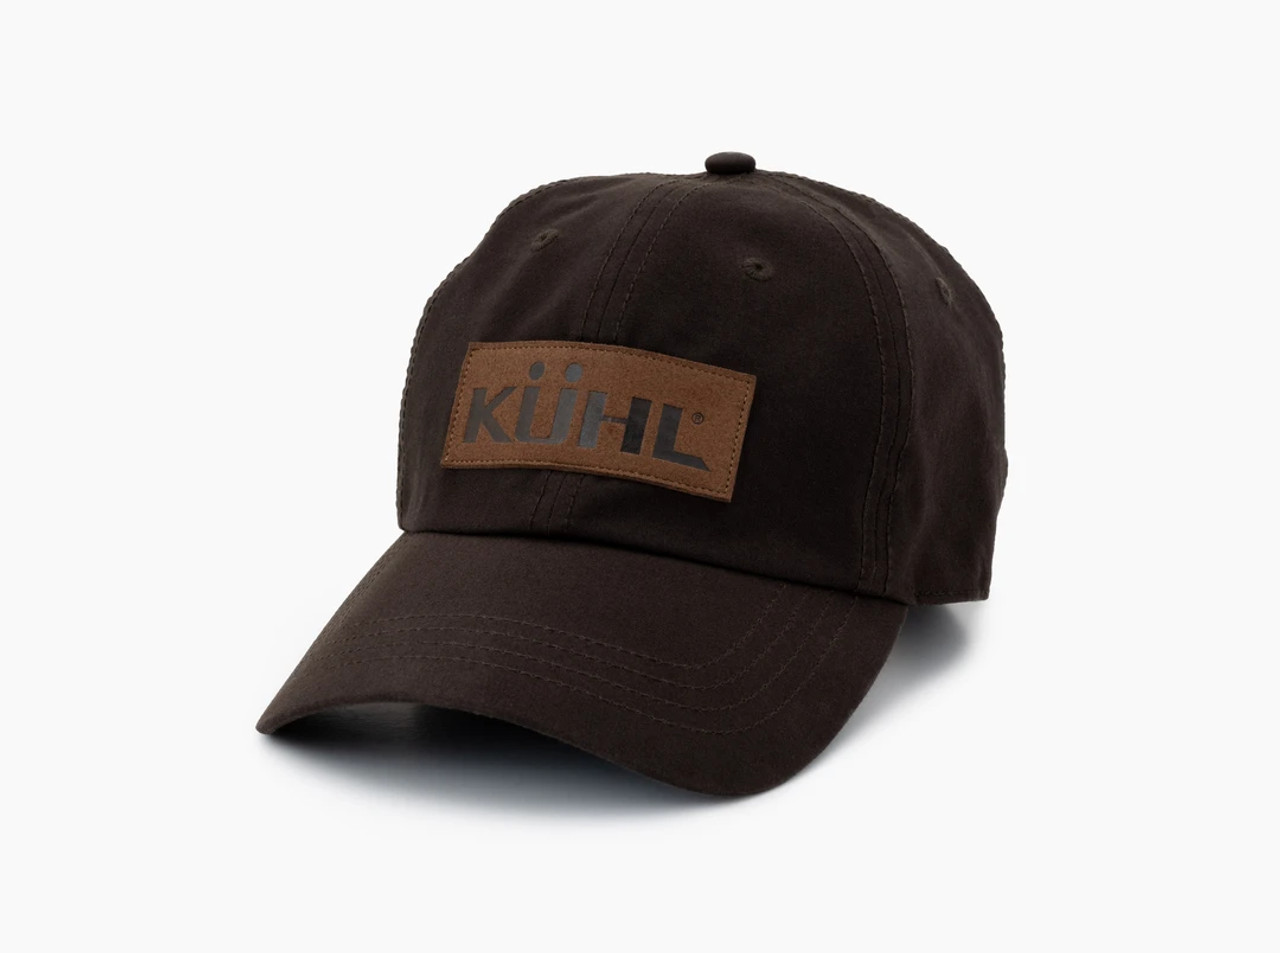 https://cdn11.bigcommerce.com/s-ecrsdtq42/images/stencil/1280x1280/products/5626/12169/RIVER_AND_TRAIL_KUHL_919_outlaw_waxed_hat_turkish_coffee_front___18611.1699299696.jpg?c=1